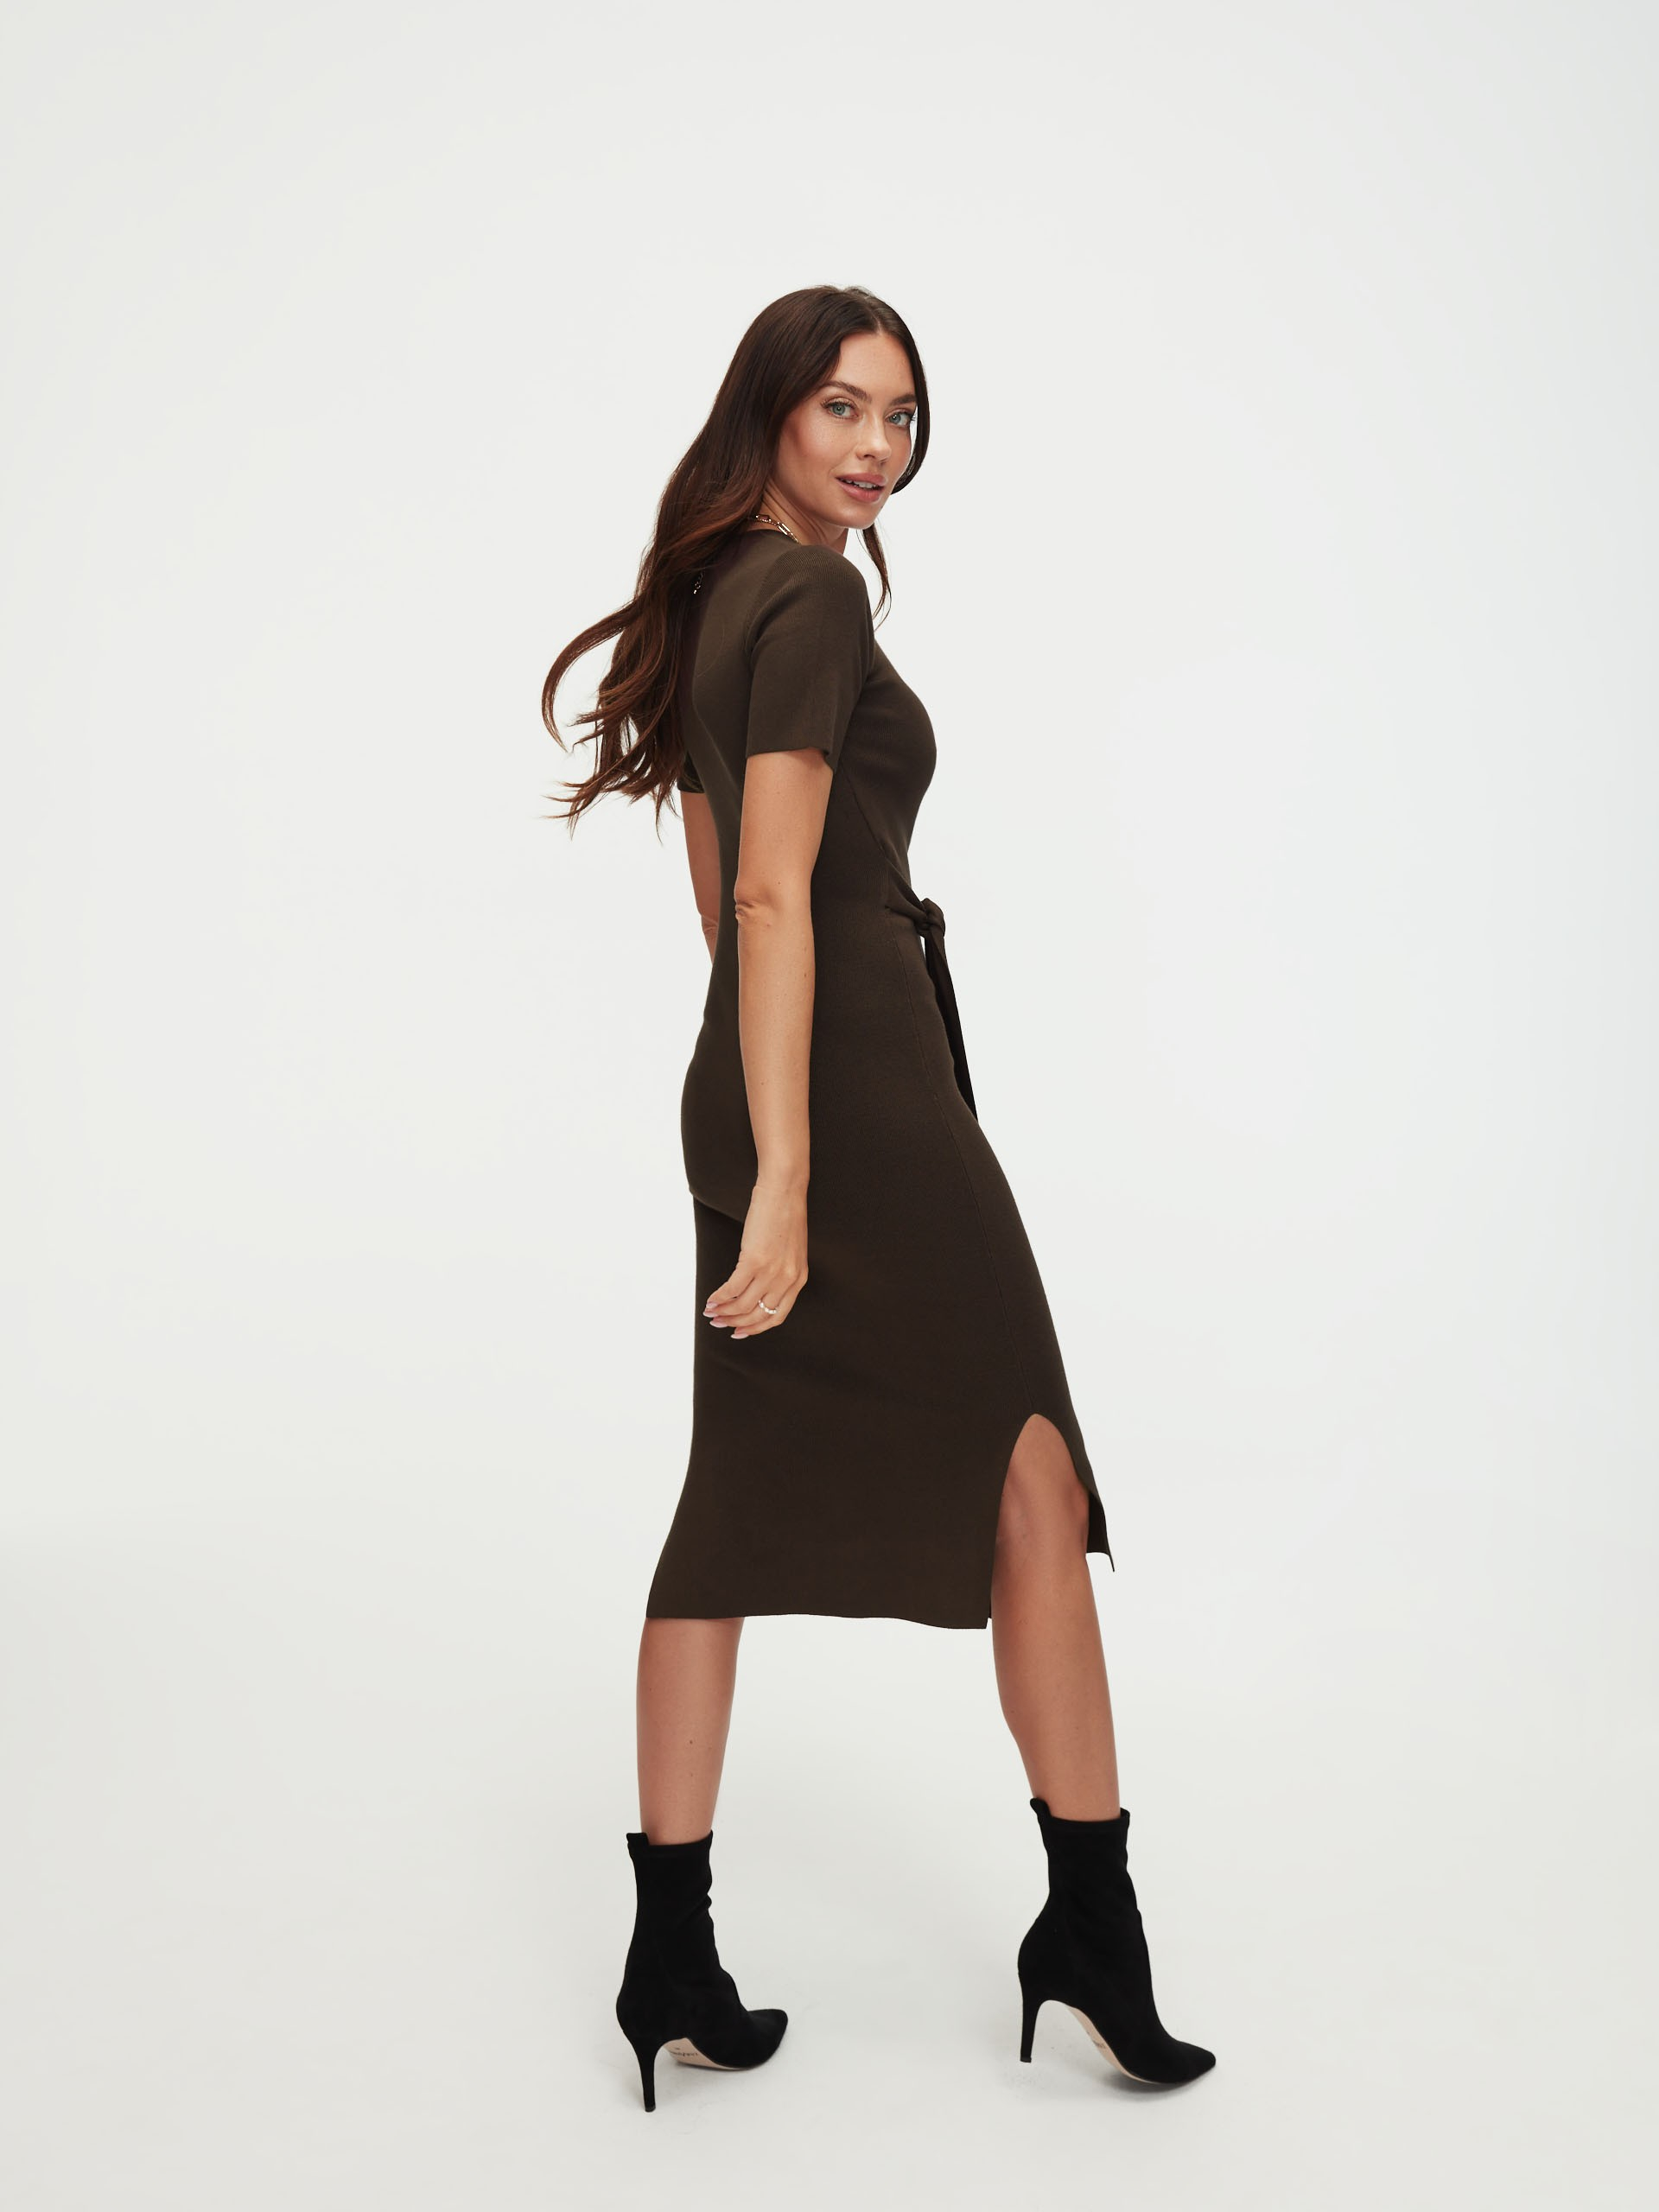 Knitted dress in brown color